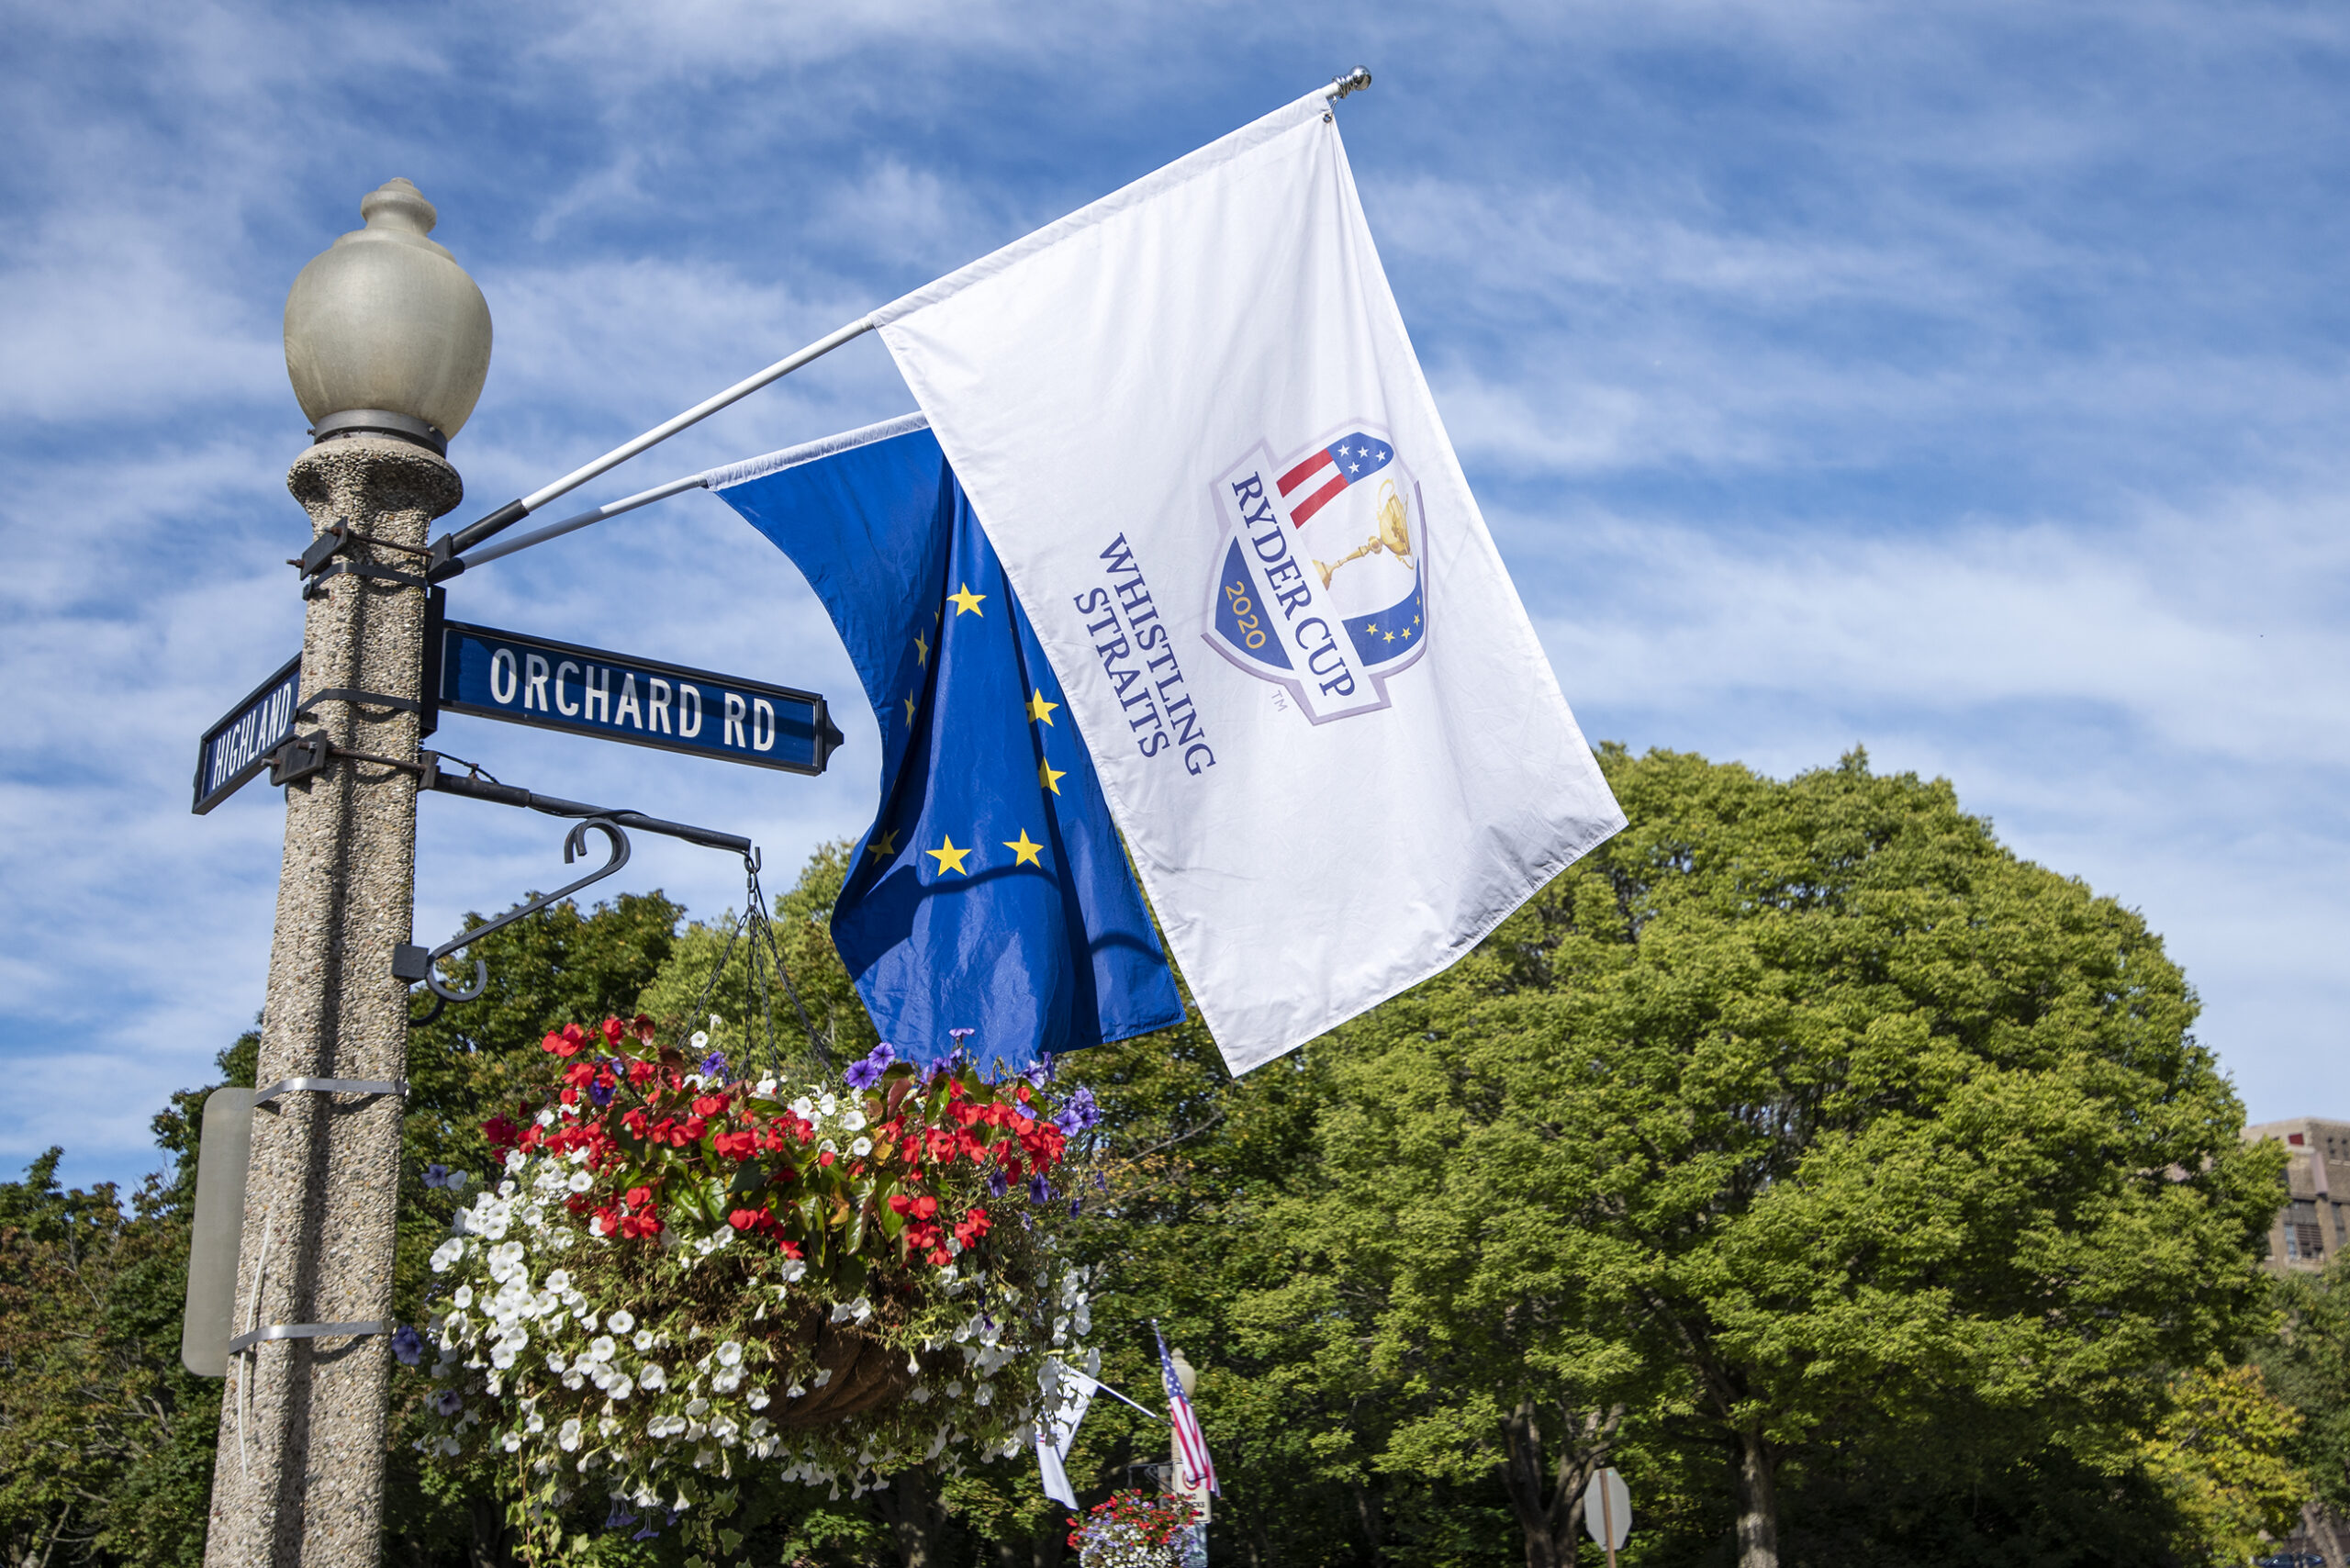 A white flag has the Ryder Cup logo on it.